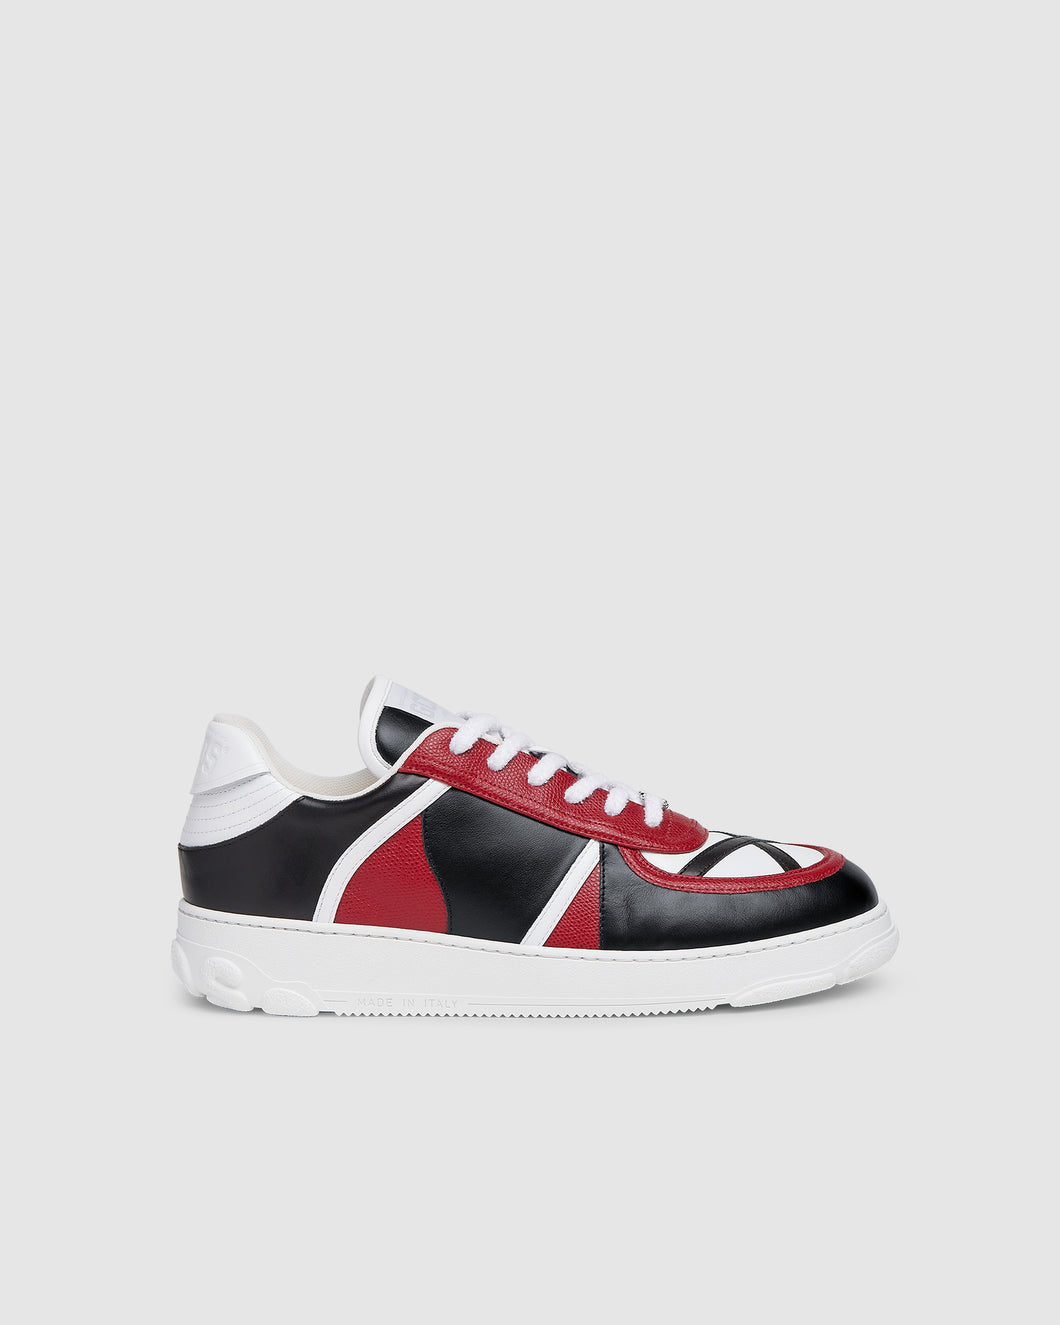 Leather Nami sneakers: Men Shoes Red | GCDS